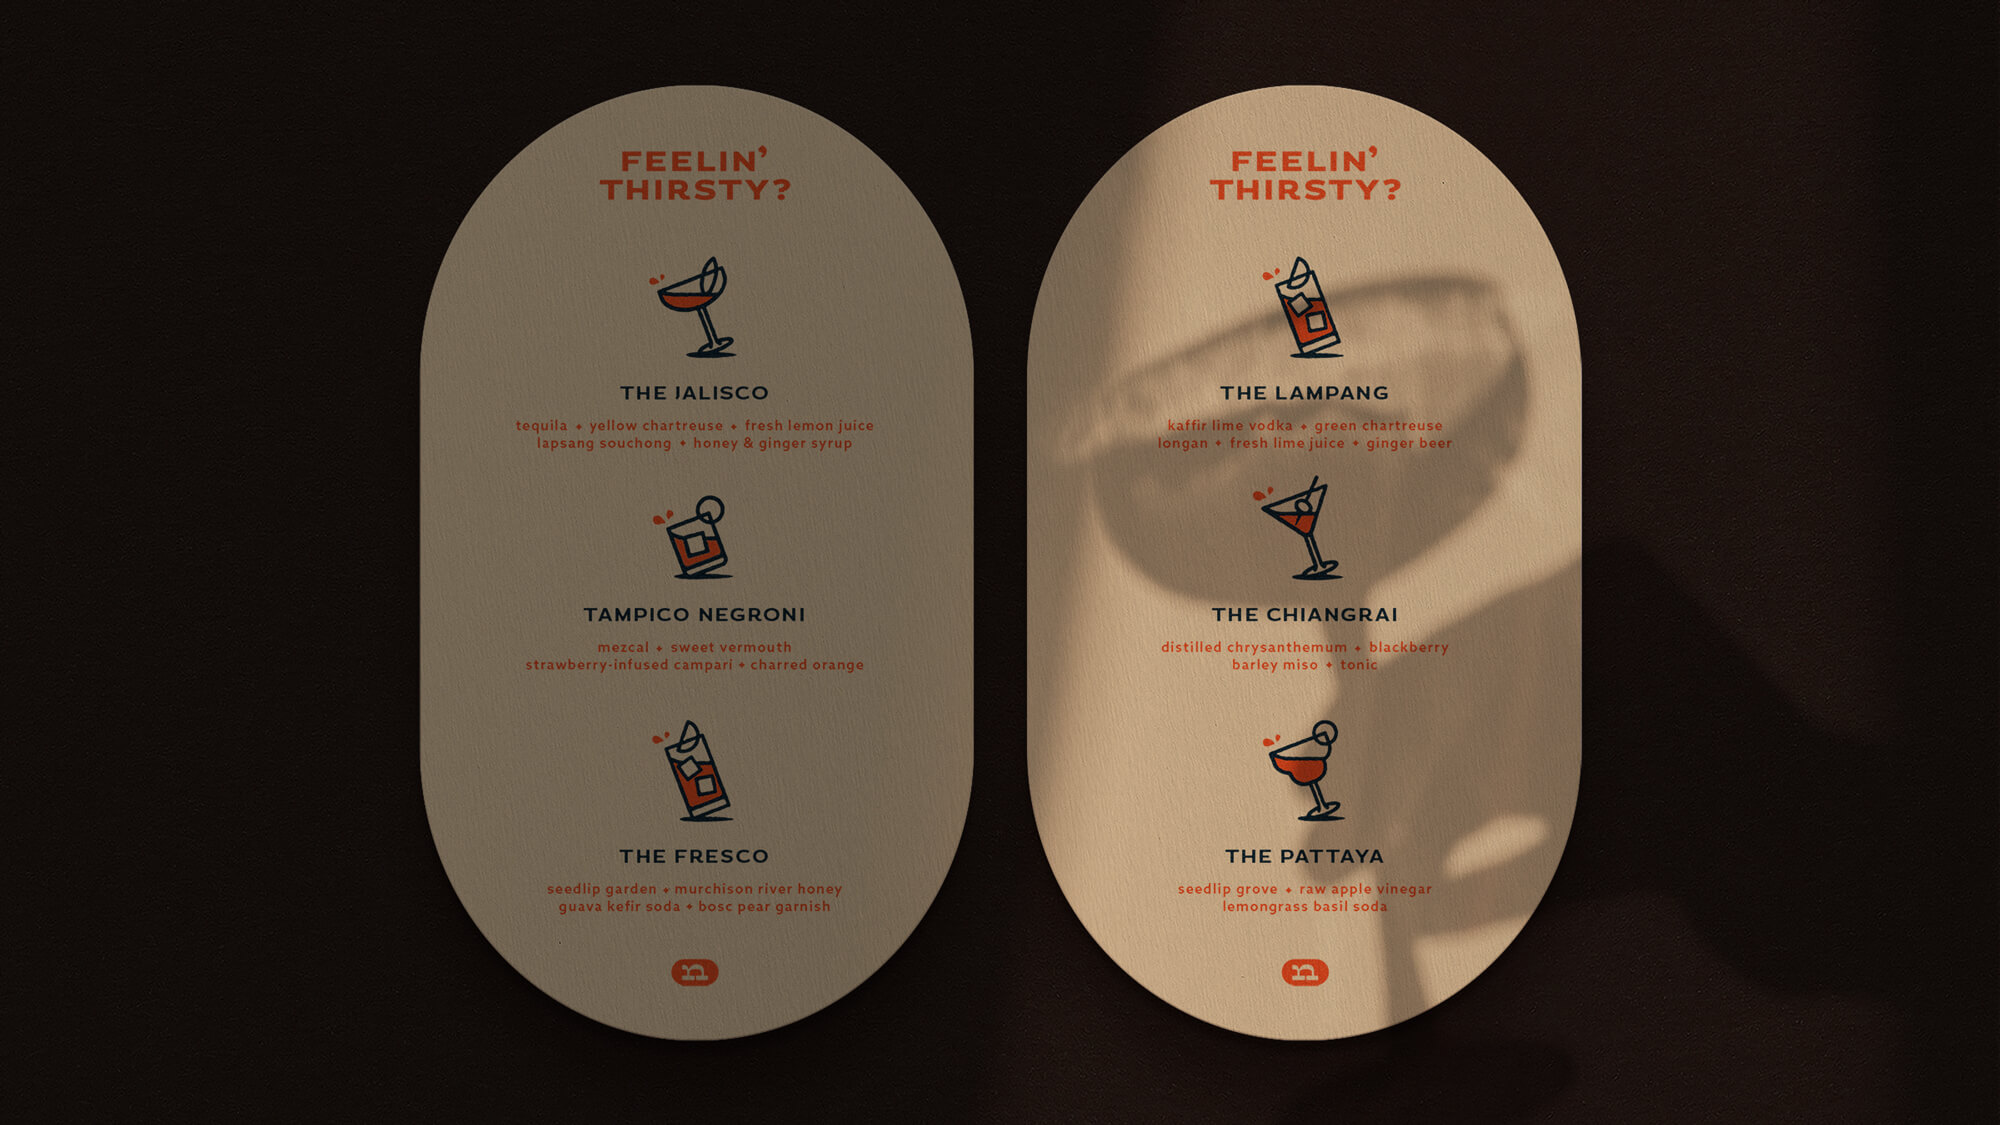 Oval-shaped menu designs printed on textured stock.